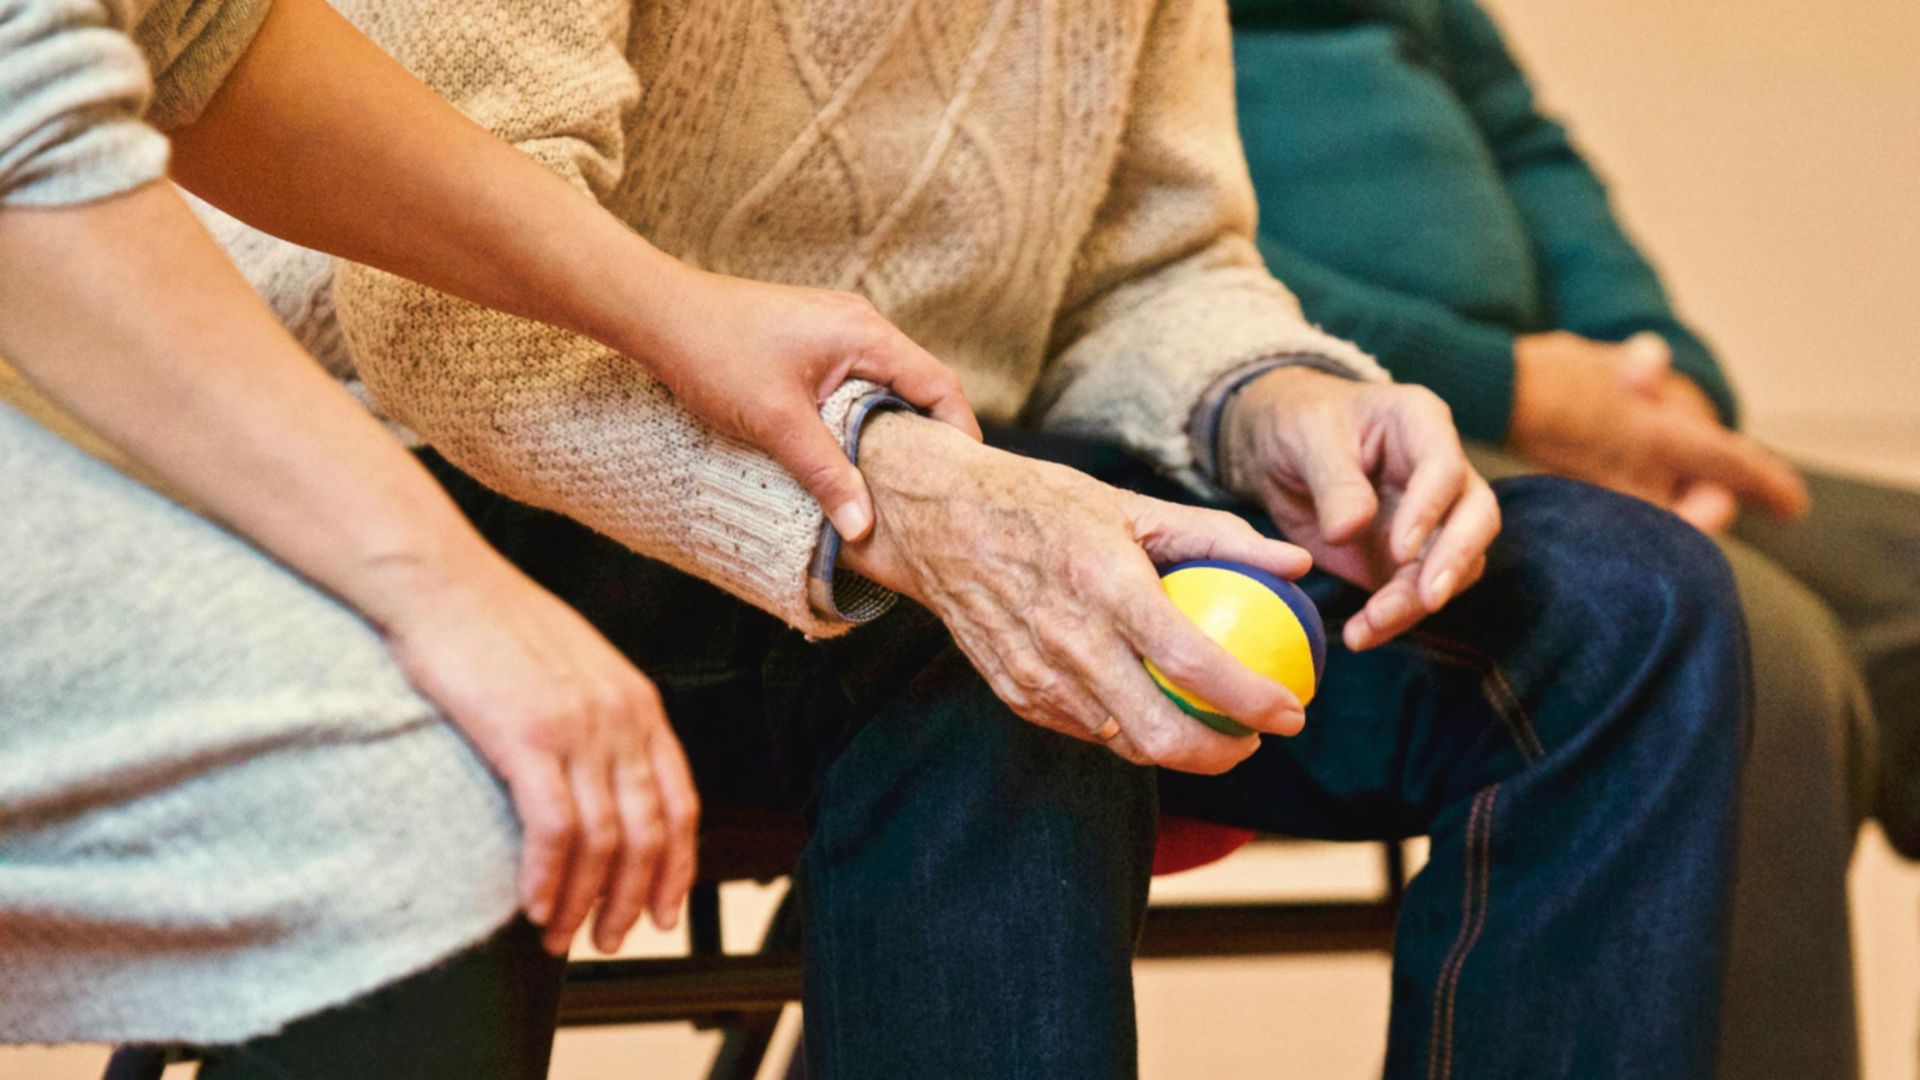 Image of carer holding elderly person's hand